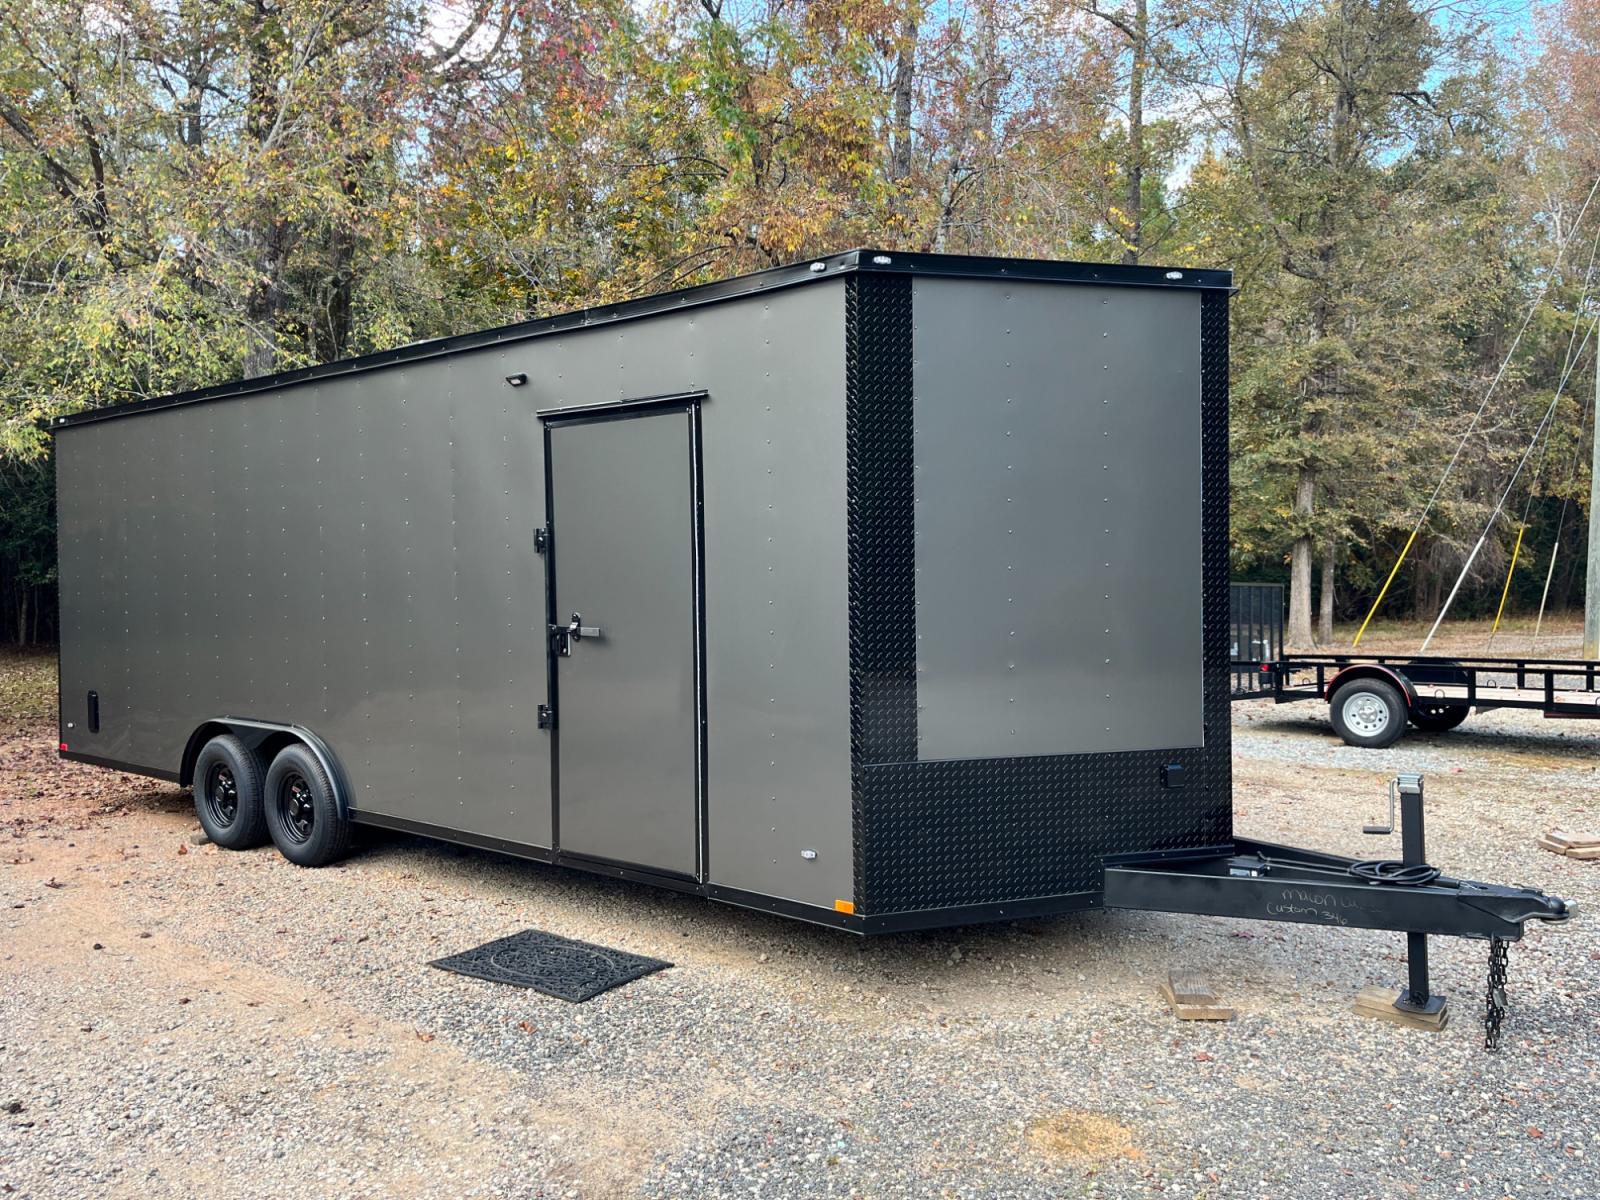 2023 .080 Charcoal Metallic w/Black Out Pkg. Elite Cargo 8.5ft X 24ft Tandem , located at 1330 Rainey Rd., Macon, 31220, (478) 960-1044, 32.845638, -83.778687 - Brand New 2023 Model Elite Cargo Trailer, Made Tifton, GA 7ft 4" Tall Inside Height, Air Conditioner, Insulated too! 15,500 BTU A/C Unit, 5 Inside LED Light Strips! Lights Up Really Bright Inside! This Deluxe Enclosed Car Hauler has Awesome Features! .080 Thick Charcoal Metallic Skin! Stunning - Photo #0